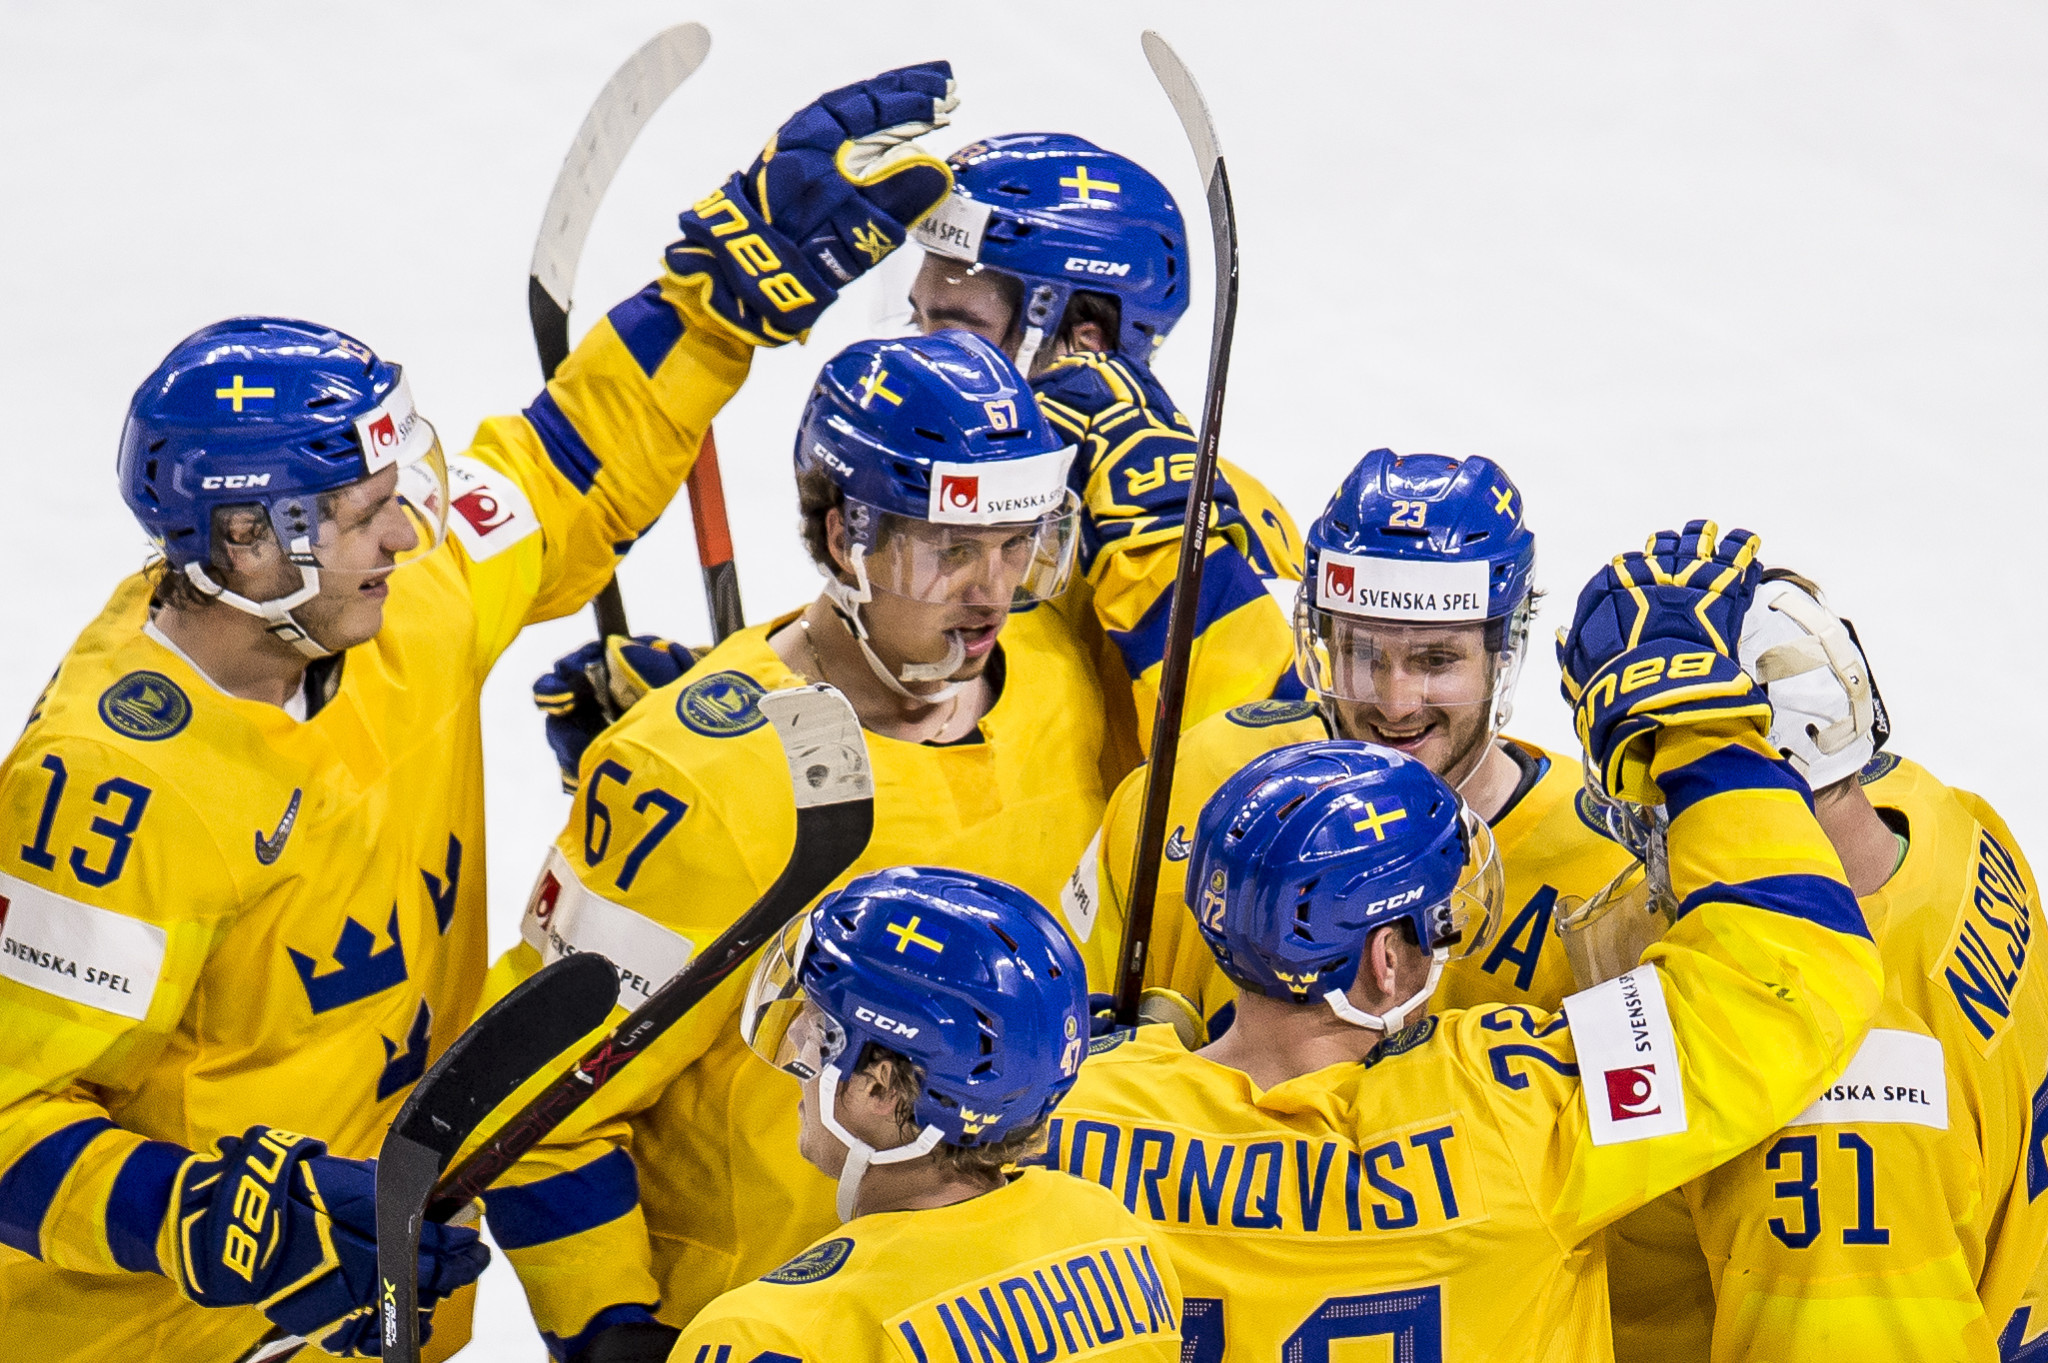 Sweden come from behind to beat Russia and top Group A at IIHF World Championship